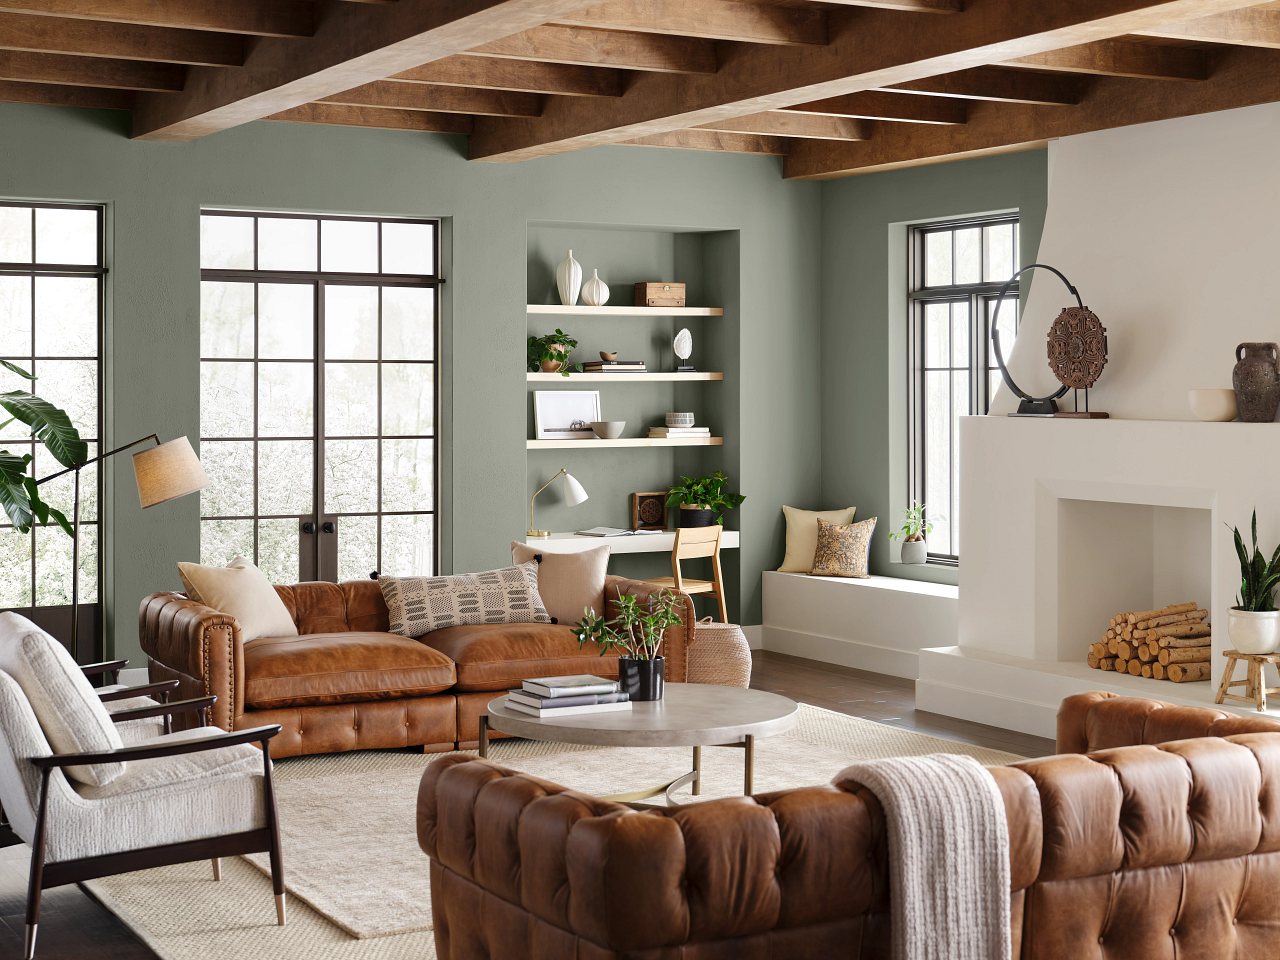 Sherwin-Williams Announces Evergreen Fog As Its 2022 Color of the Year